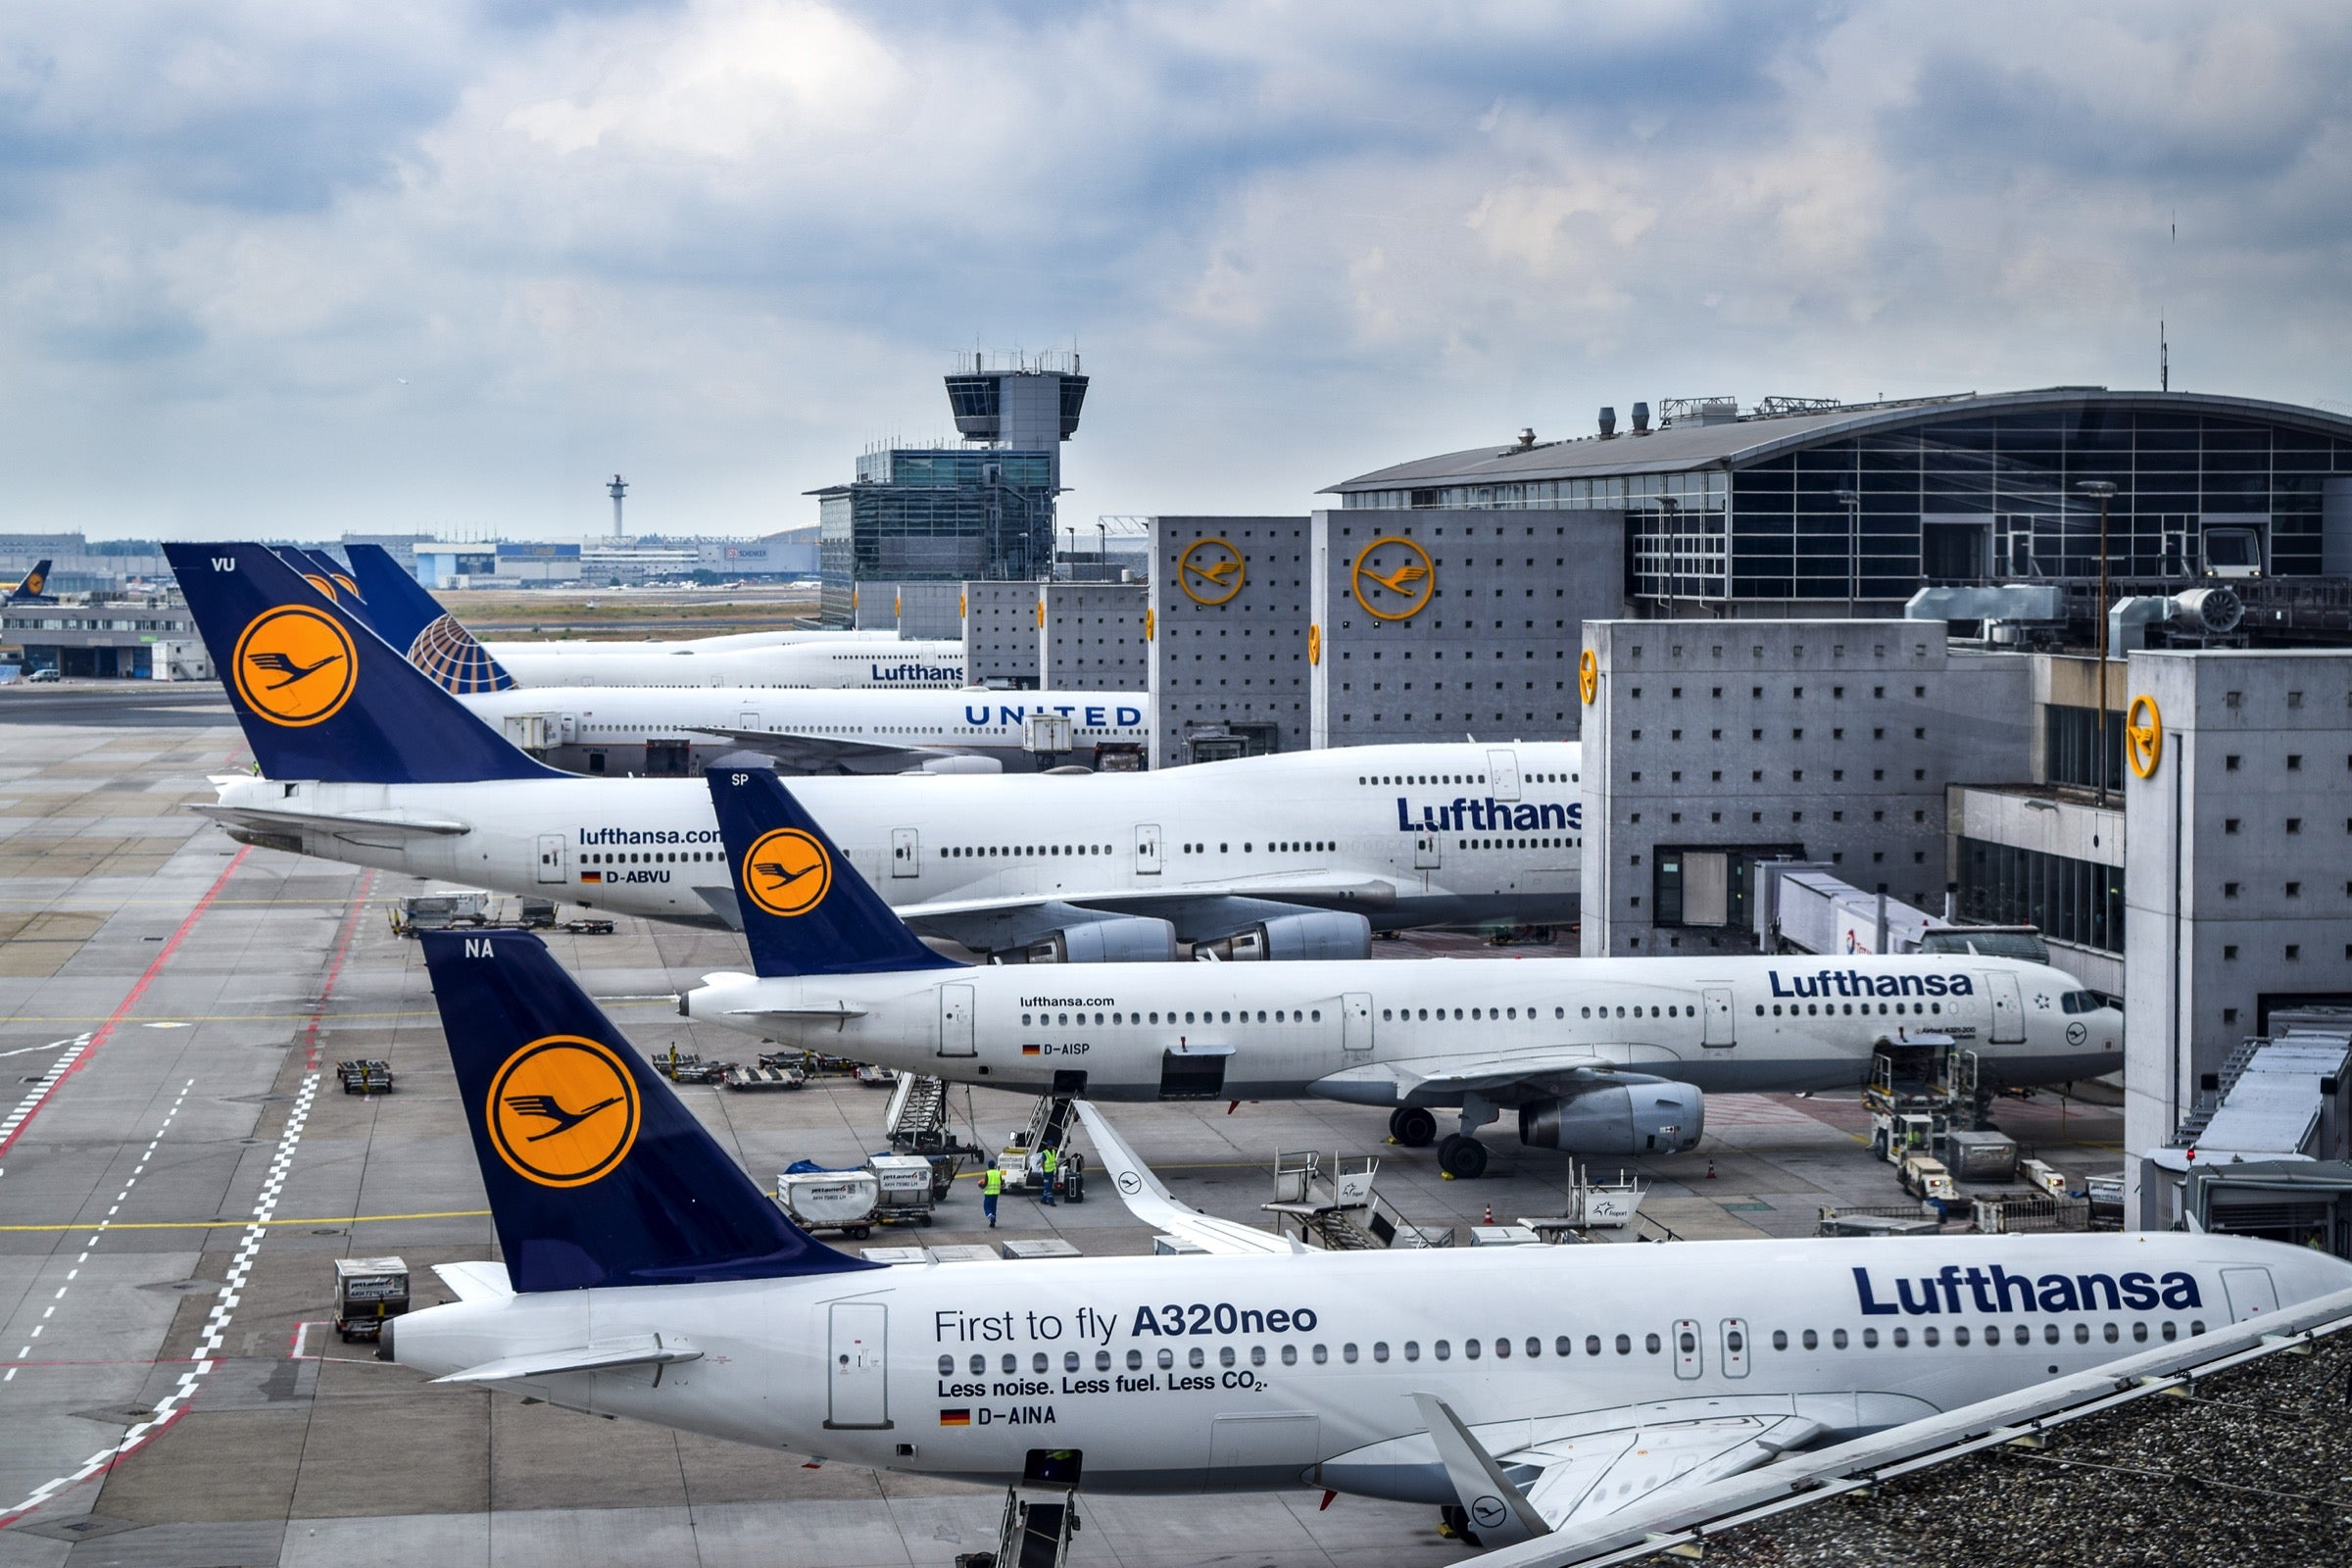 Lufthansa and United planes at the gate in Frankfurt airport